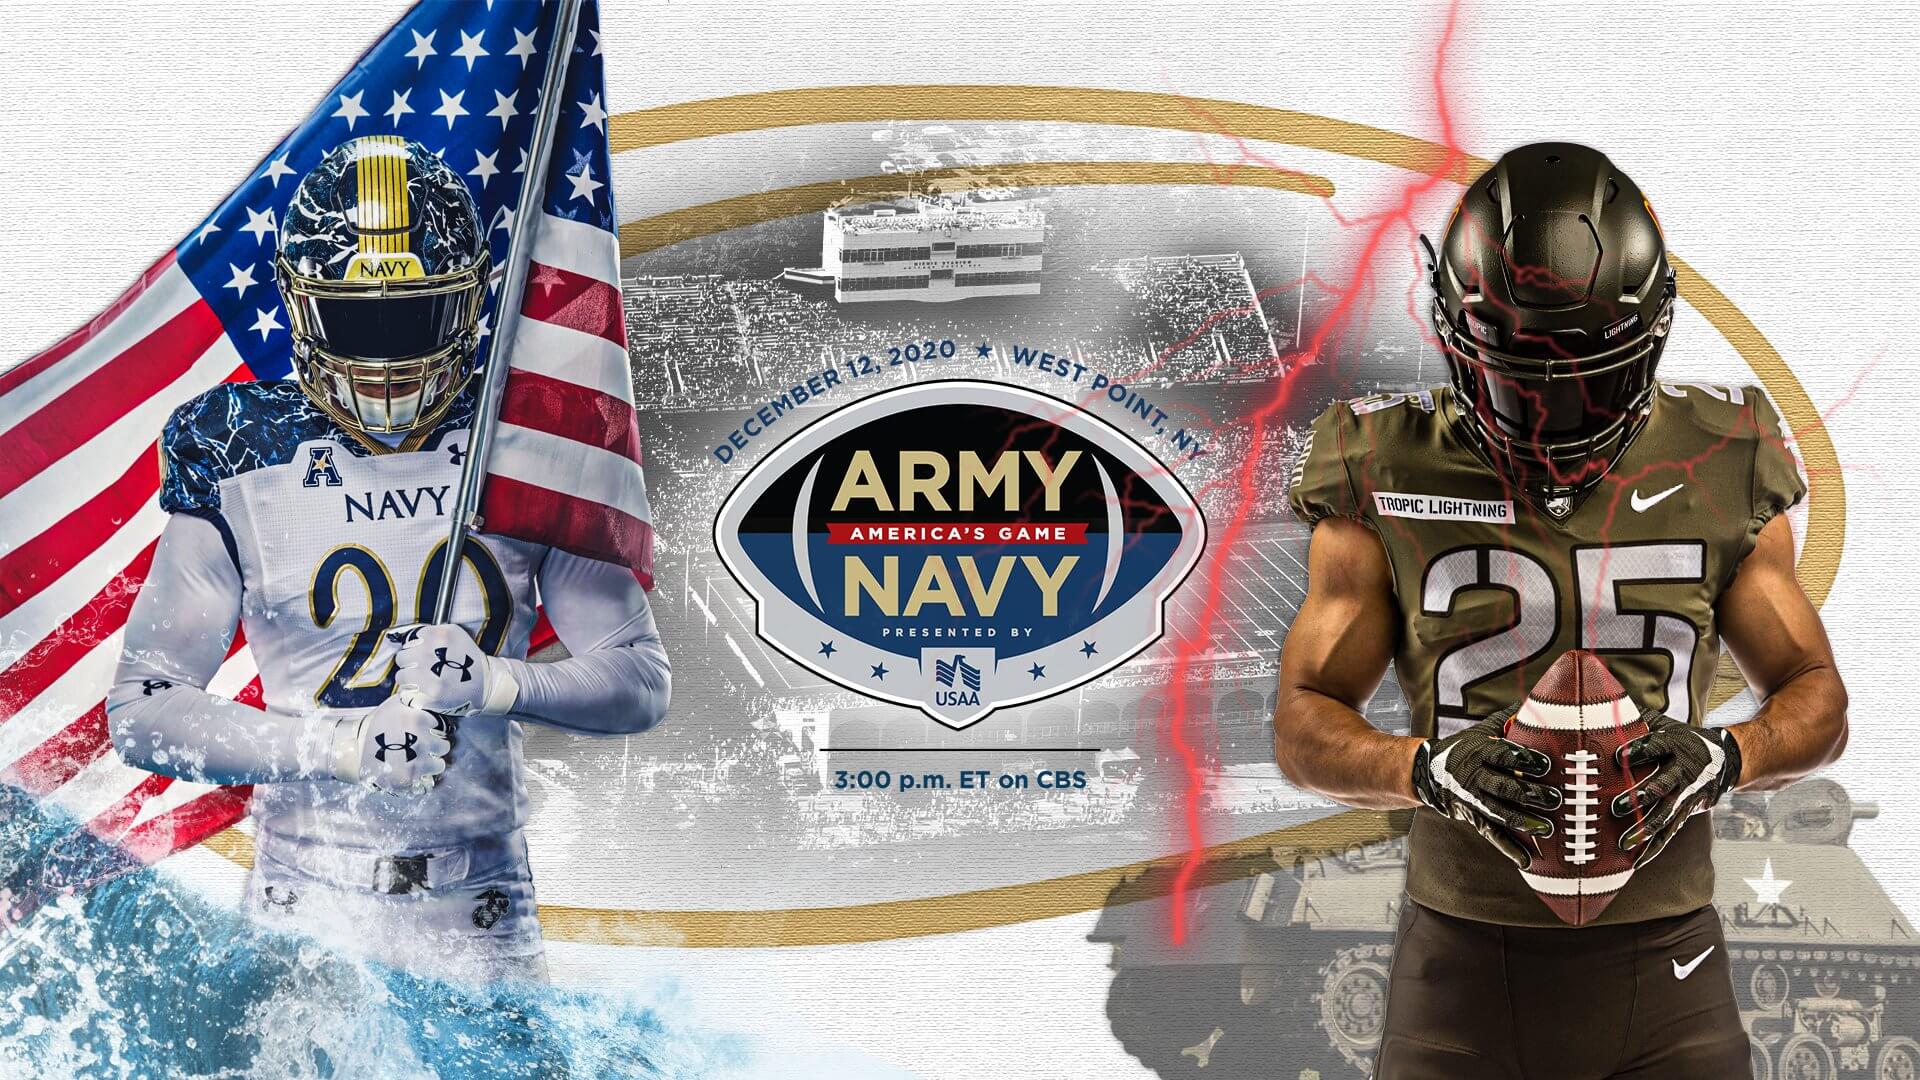 ArmyNavy Game 2022 FanDuel Moneyline Odds, Point Spread Pick, and